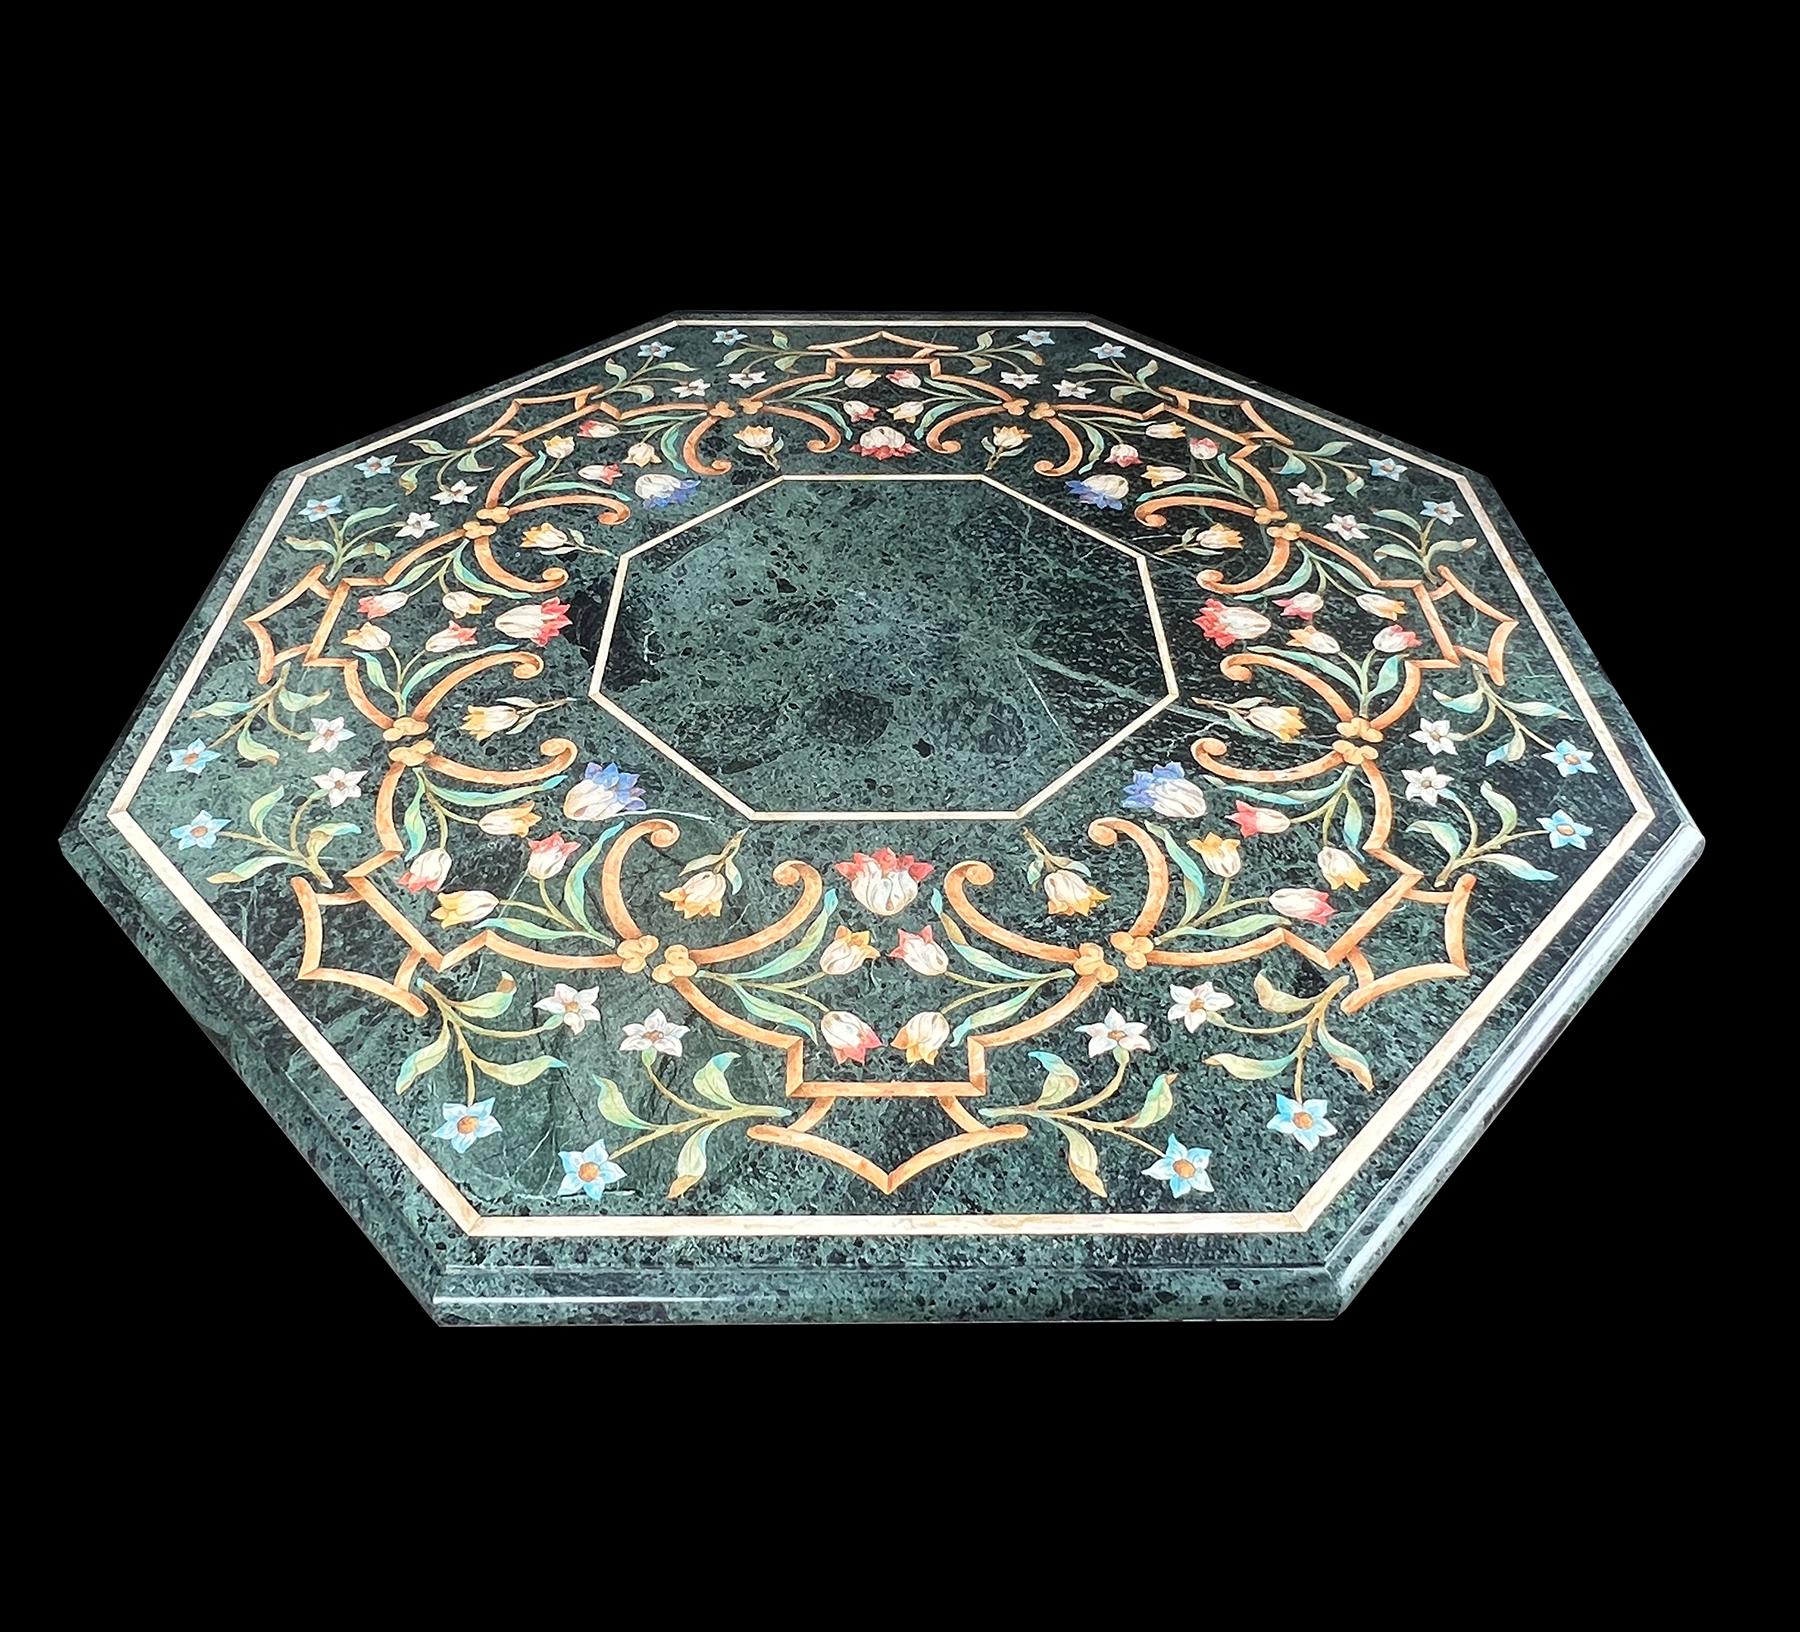 the octagonal forest-green marble top with painted inlaid scrollwork surrounded by floral and foliate decoration; all raised on a neoclassical style Michael Taylor faux stone cross tripod lyre base